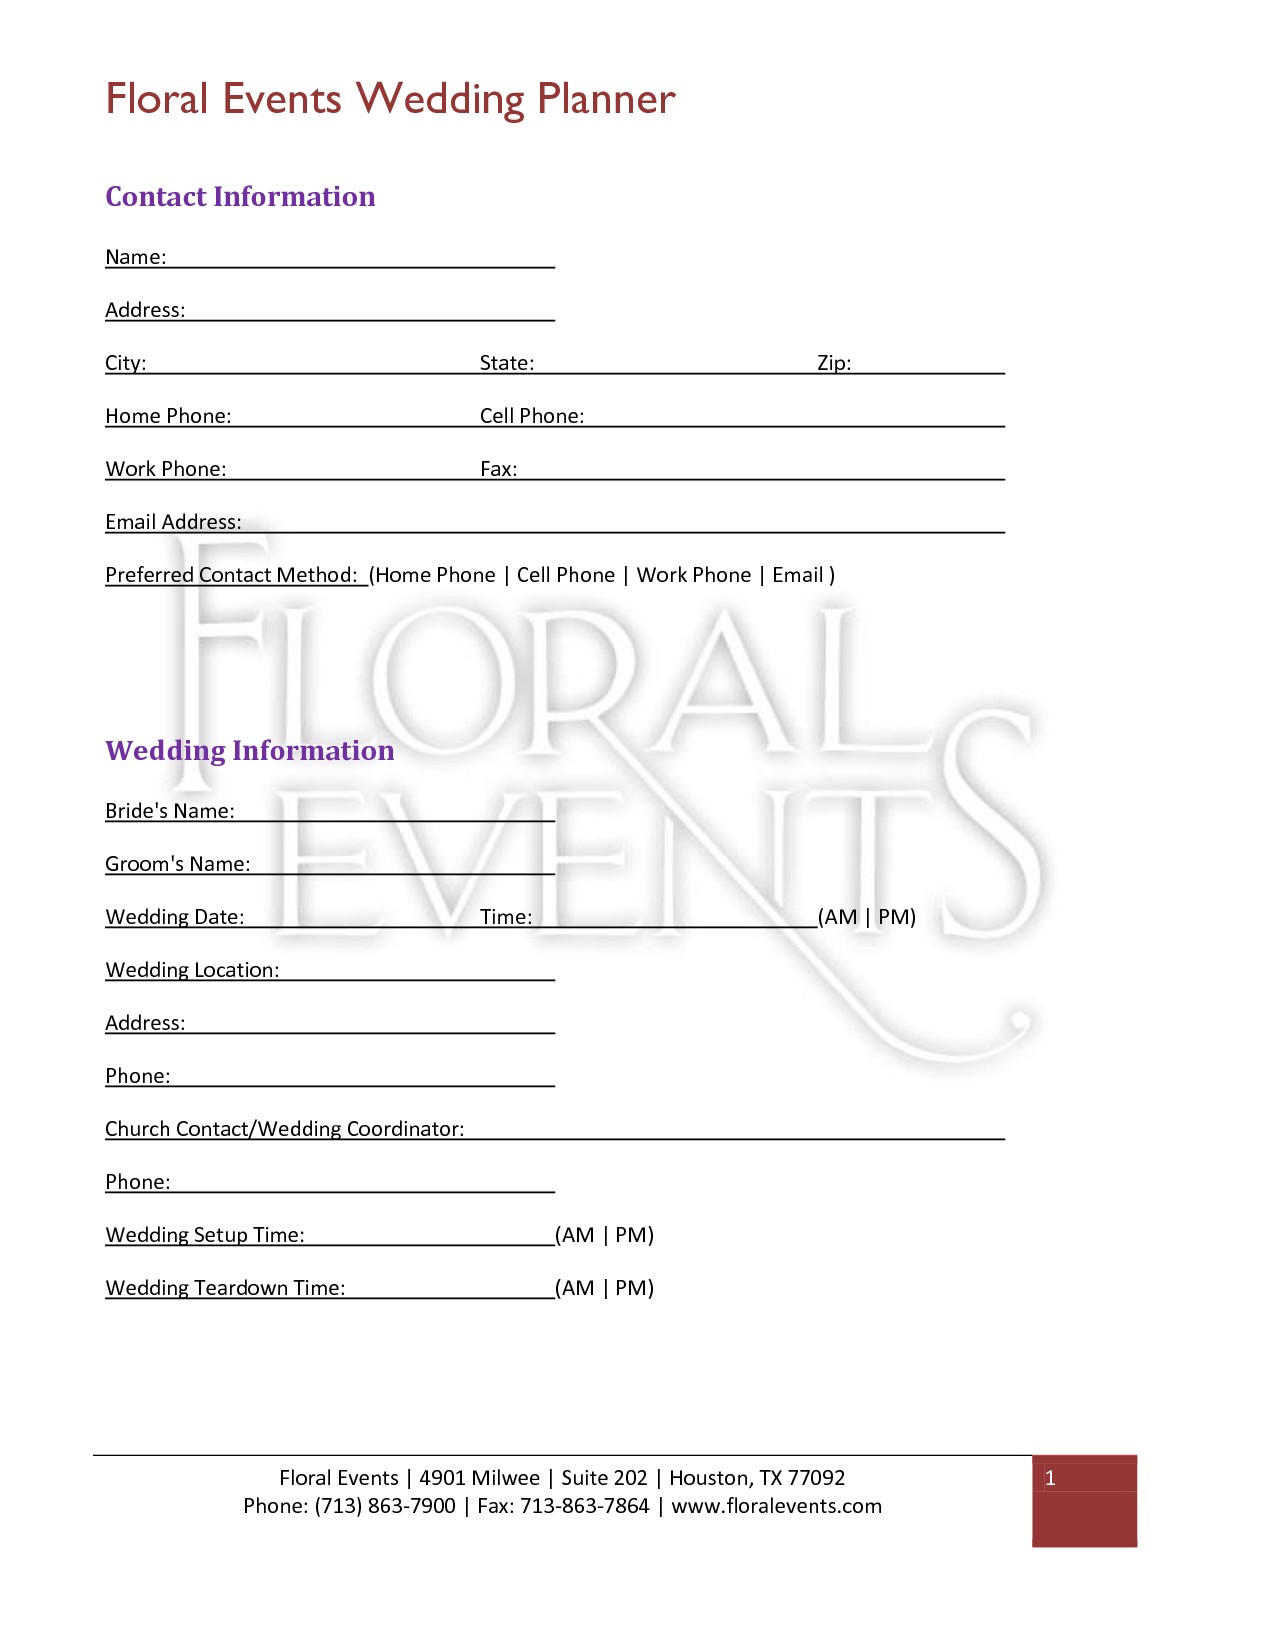 Florist Wedding Contract For Posies Poms In 2018 Pinterest Document